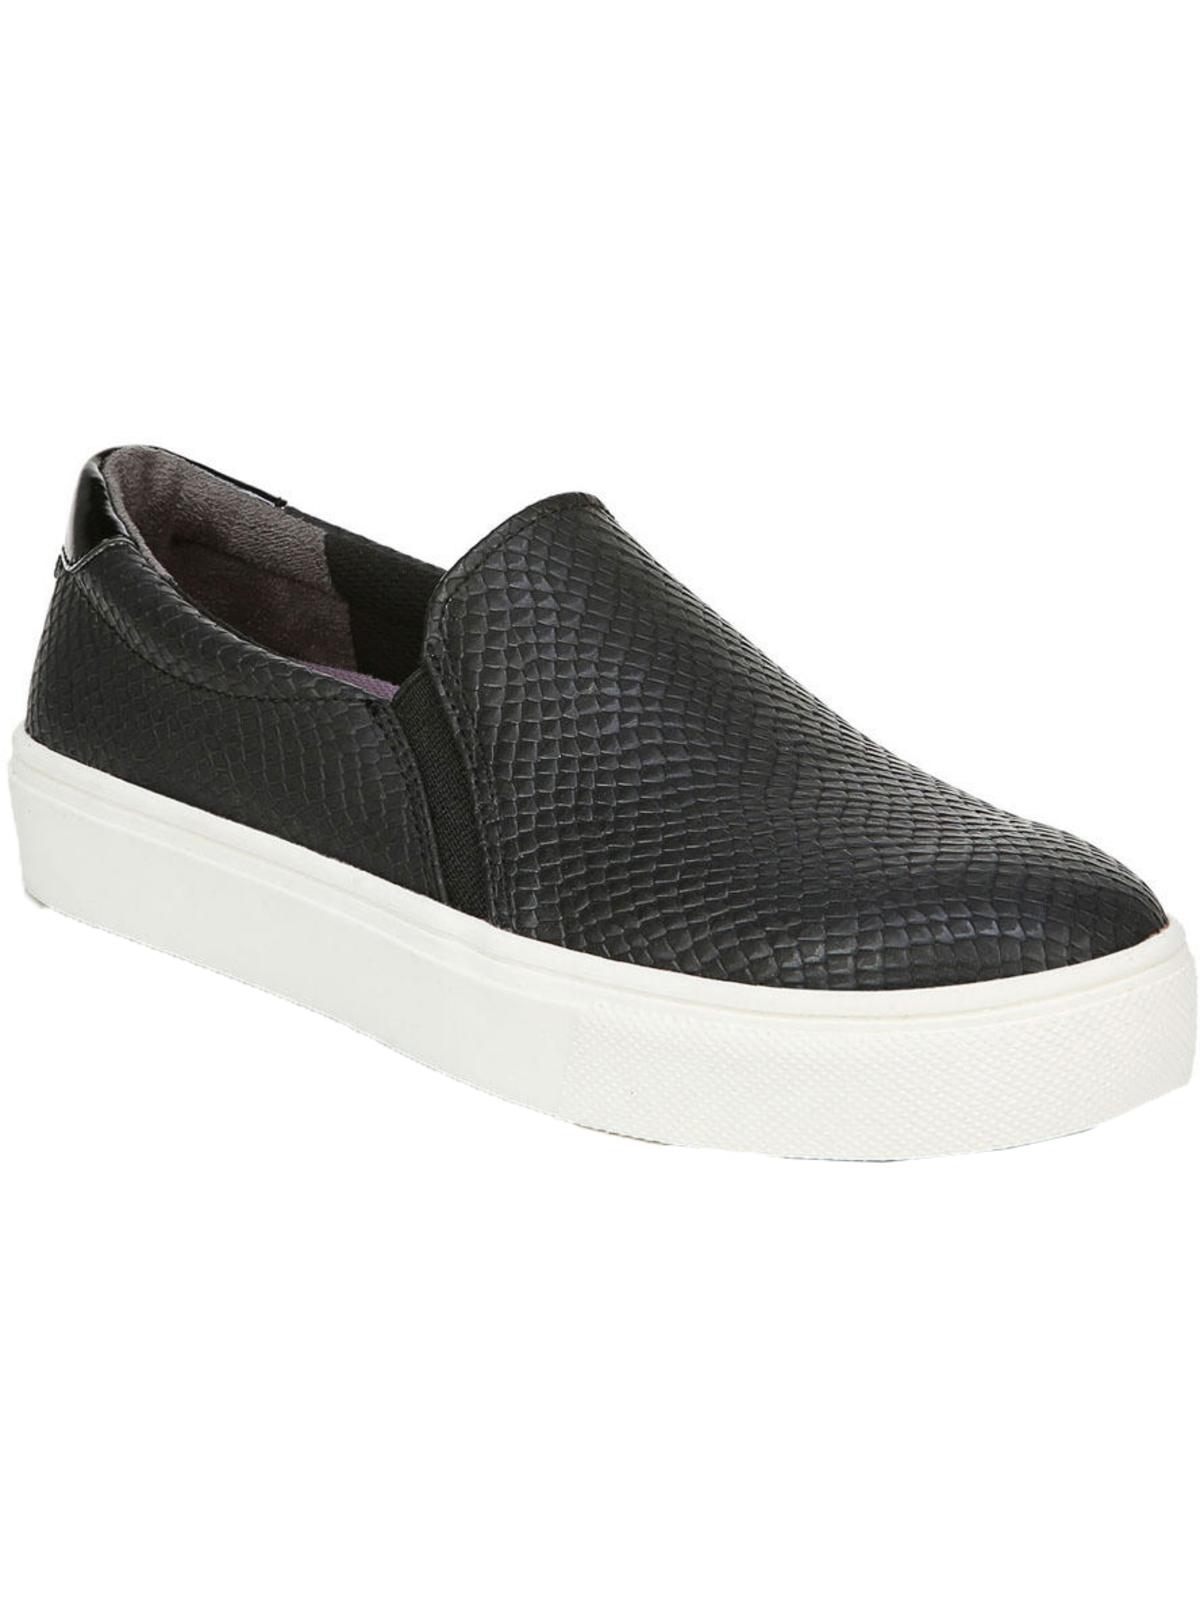 Dr. Scholl's - Dr. Scholl's Womens Nova Leather Loafer Fashion Sneakers ...